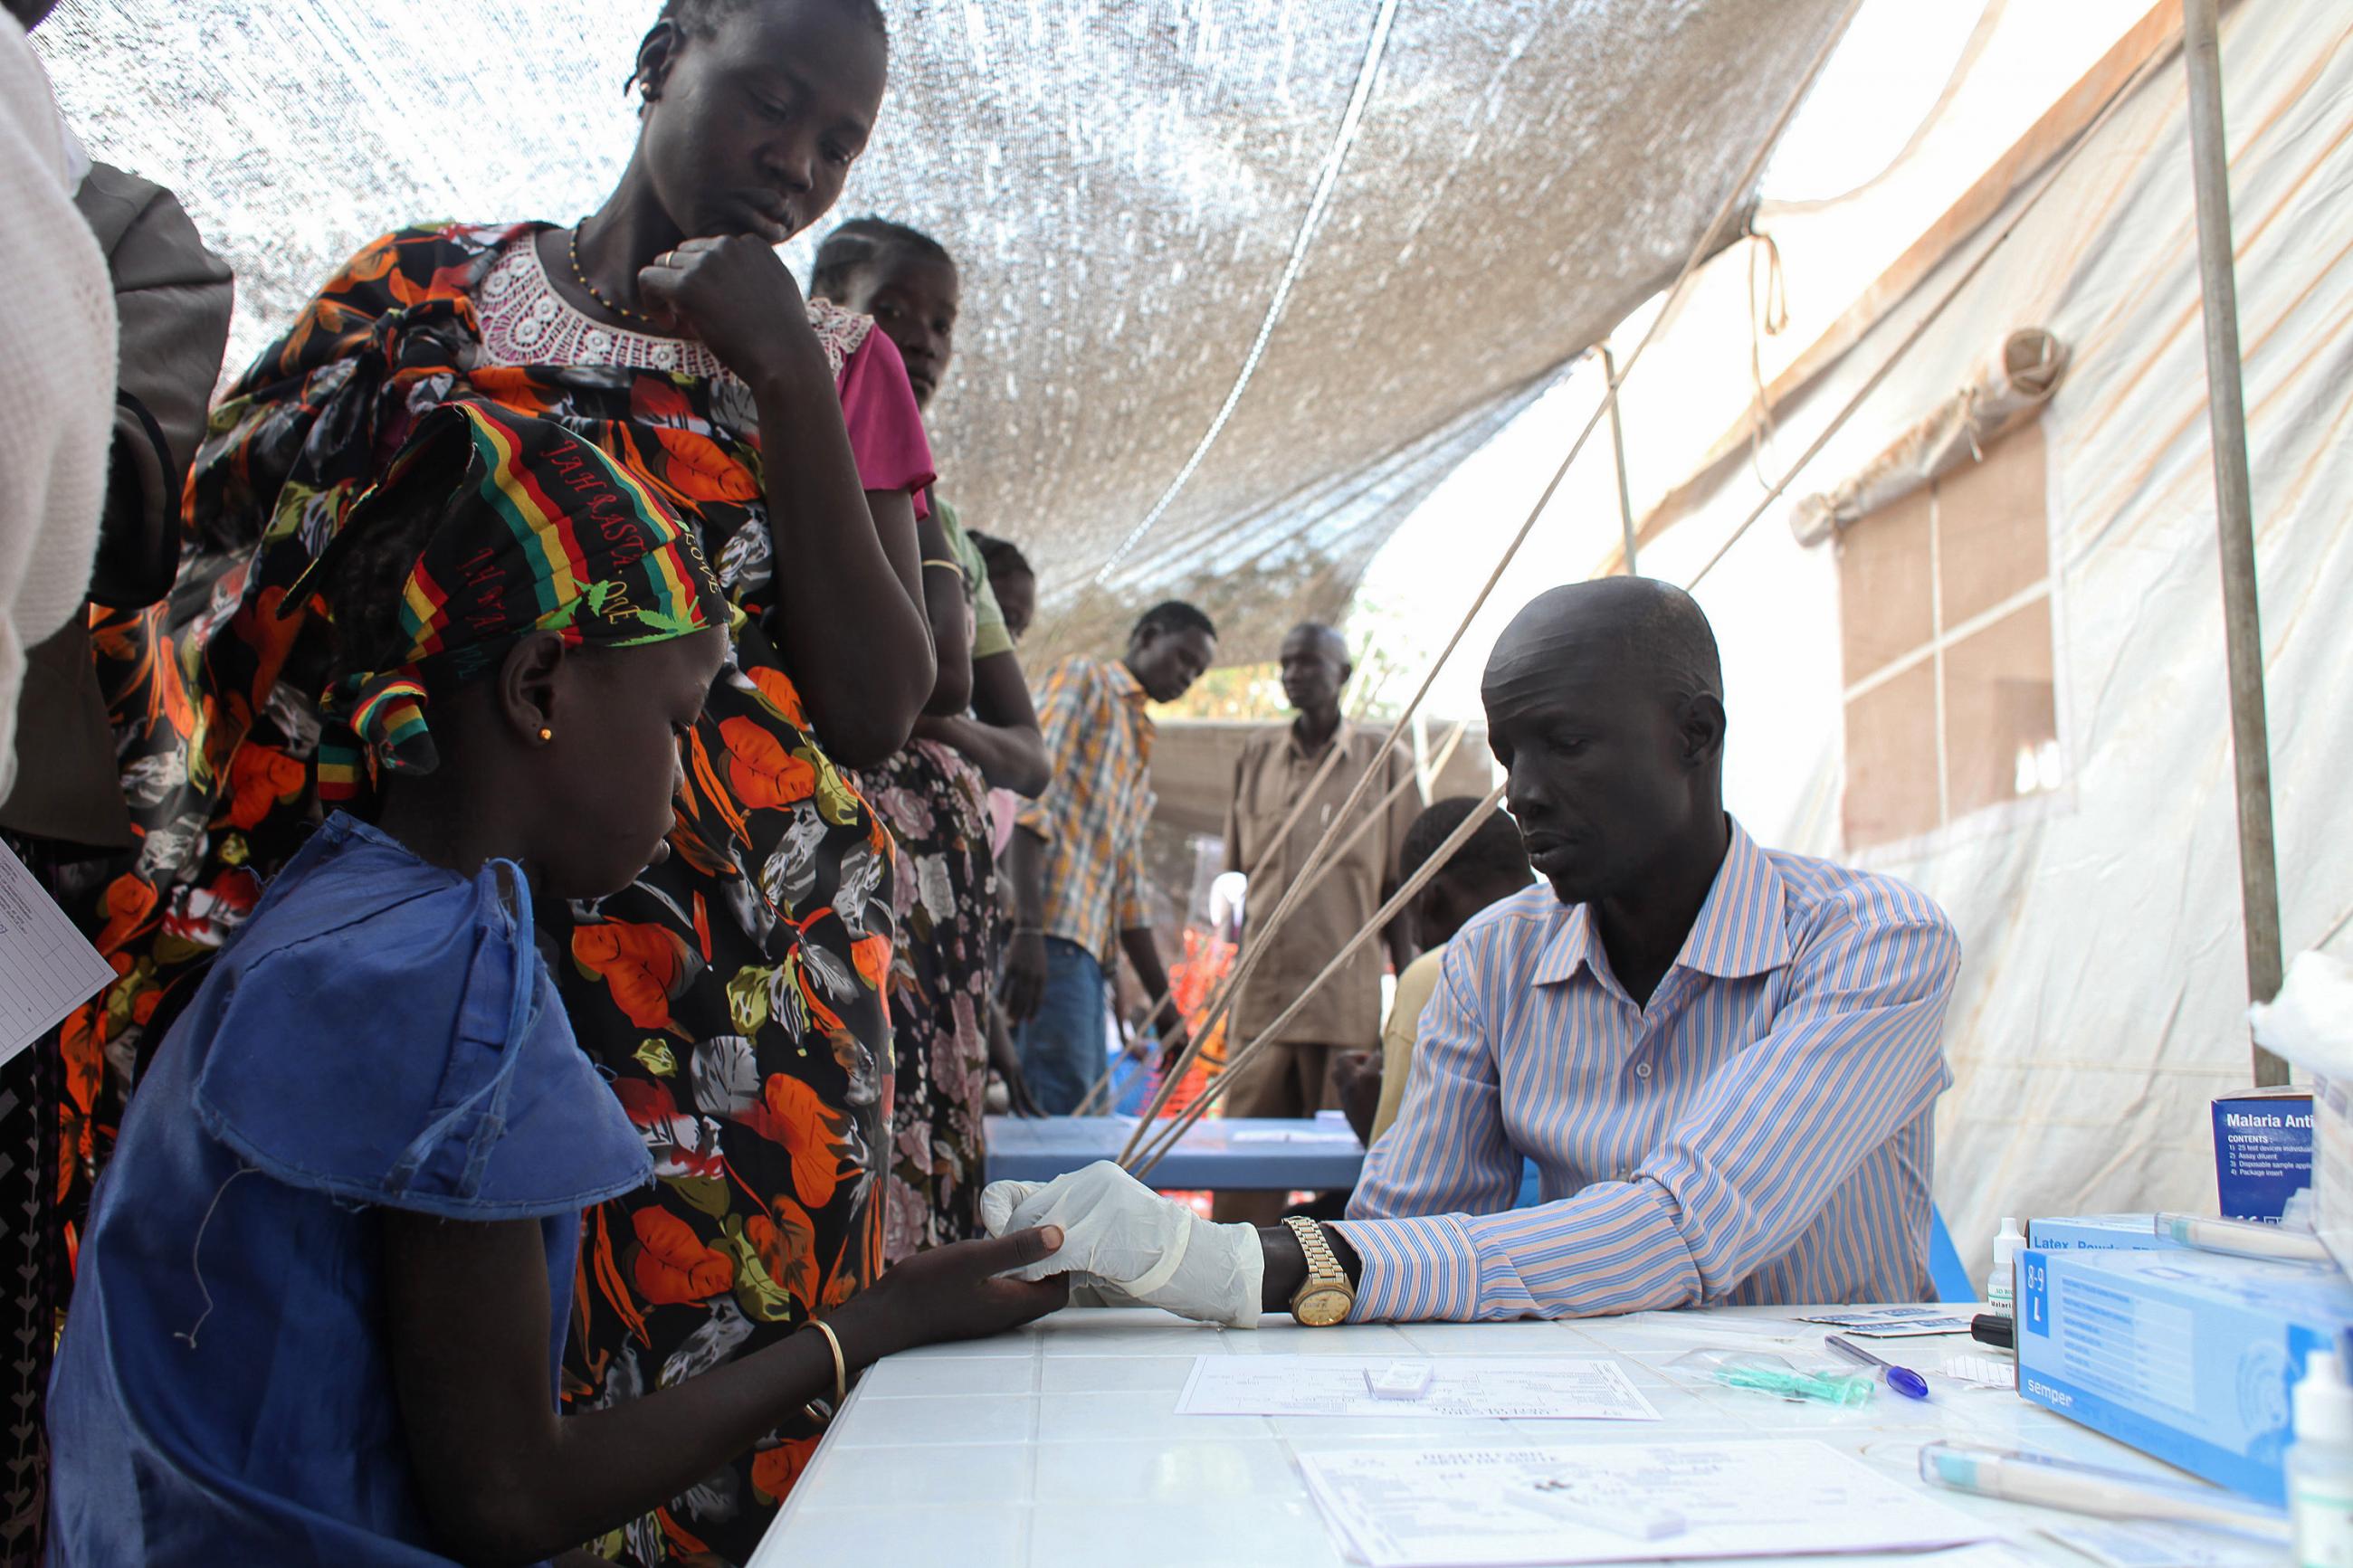 A displaced girl is tested for malaria at an MSF clinic in Tomping camp, Juba, South Sudan on January 10, 2014.